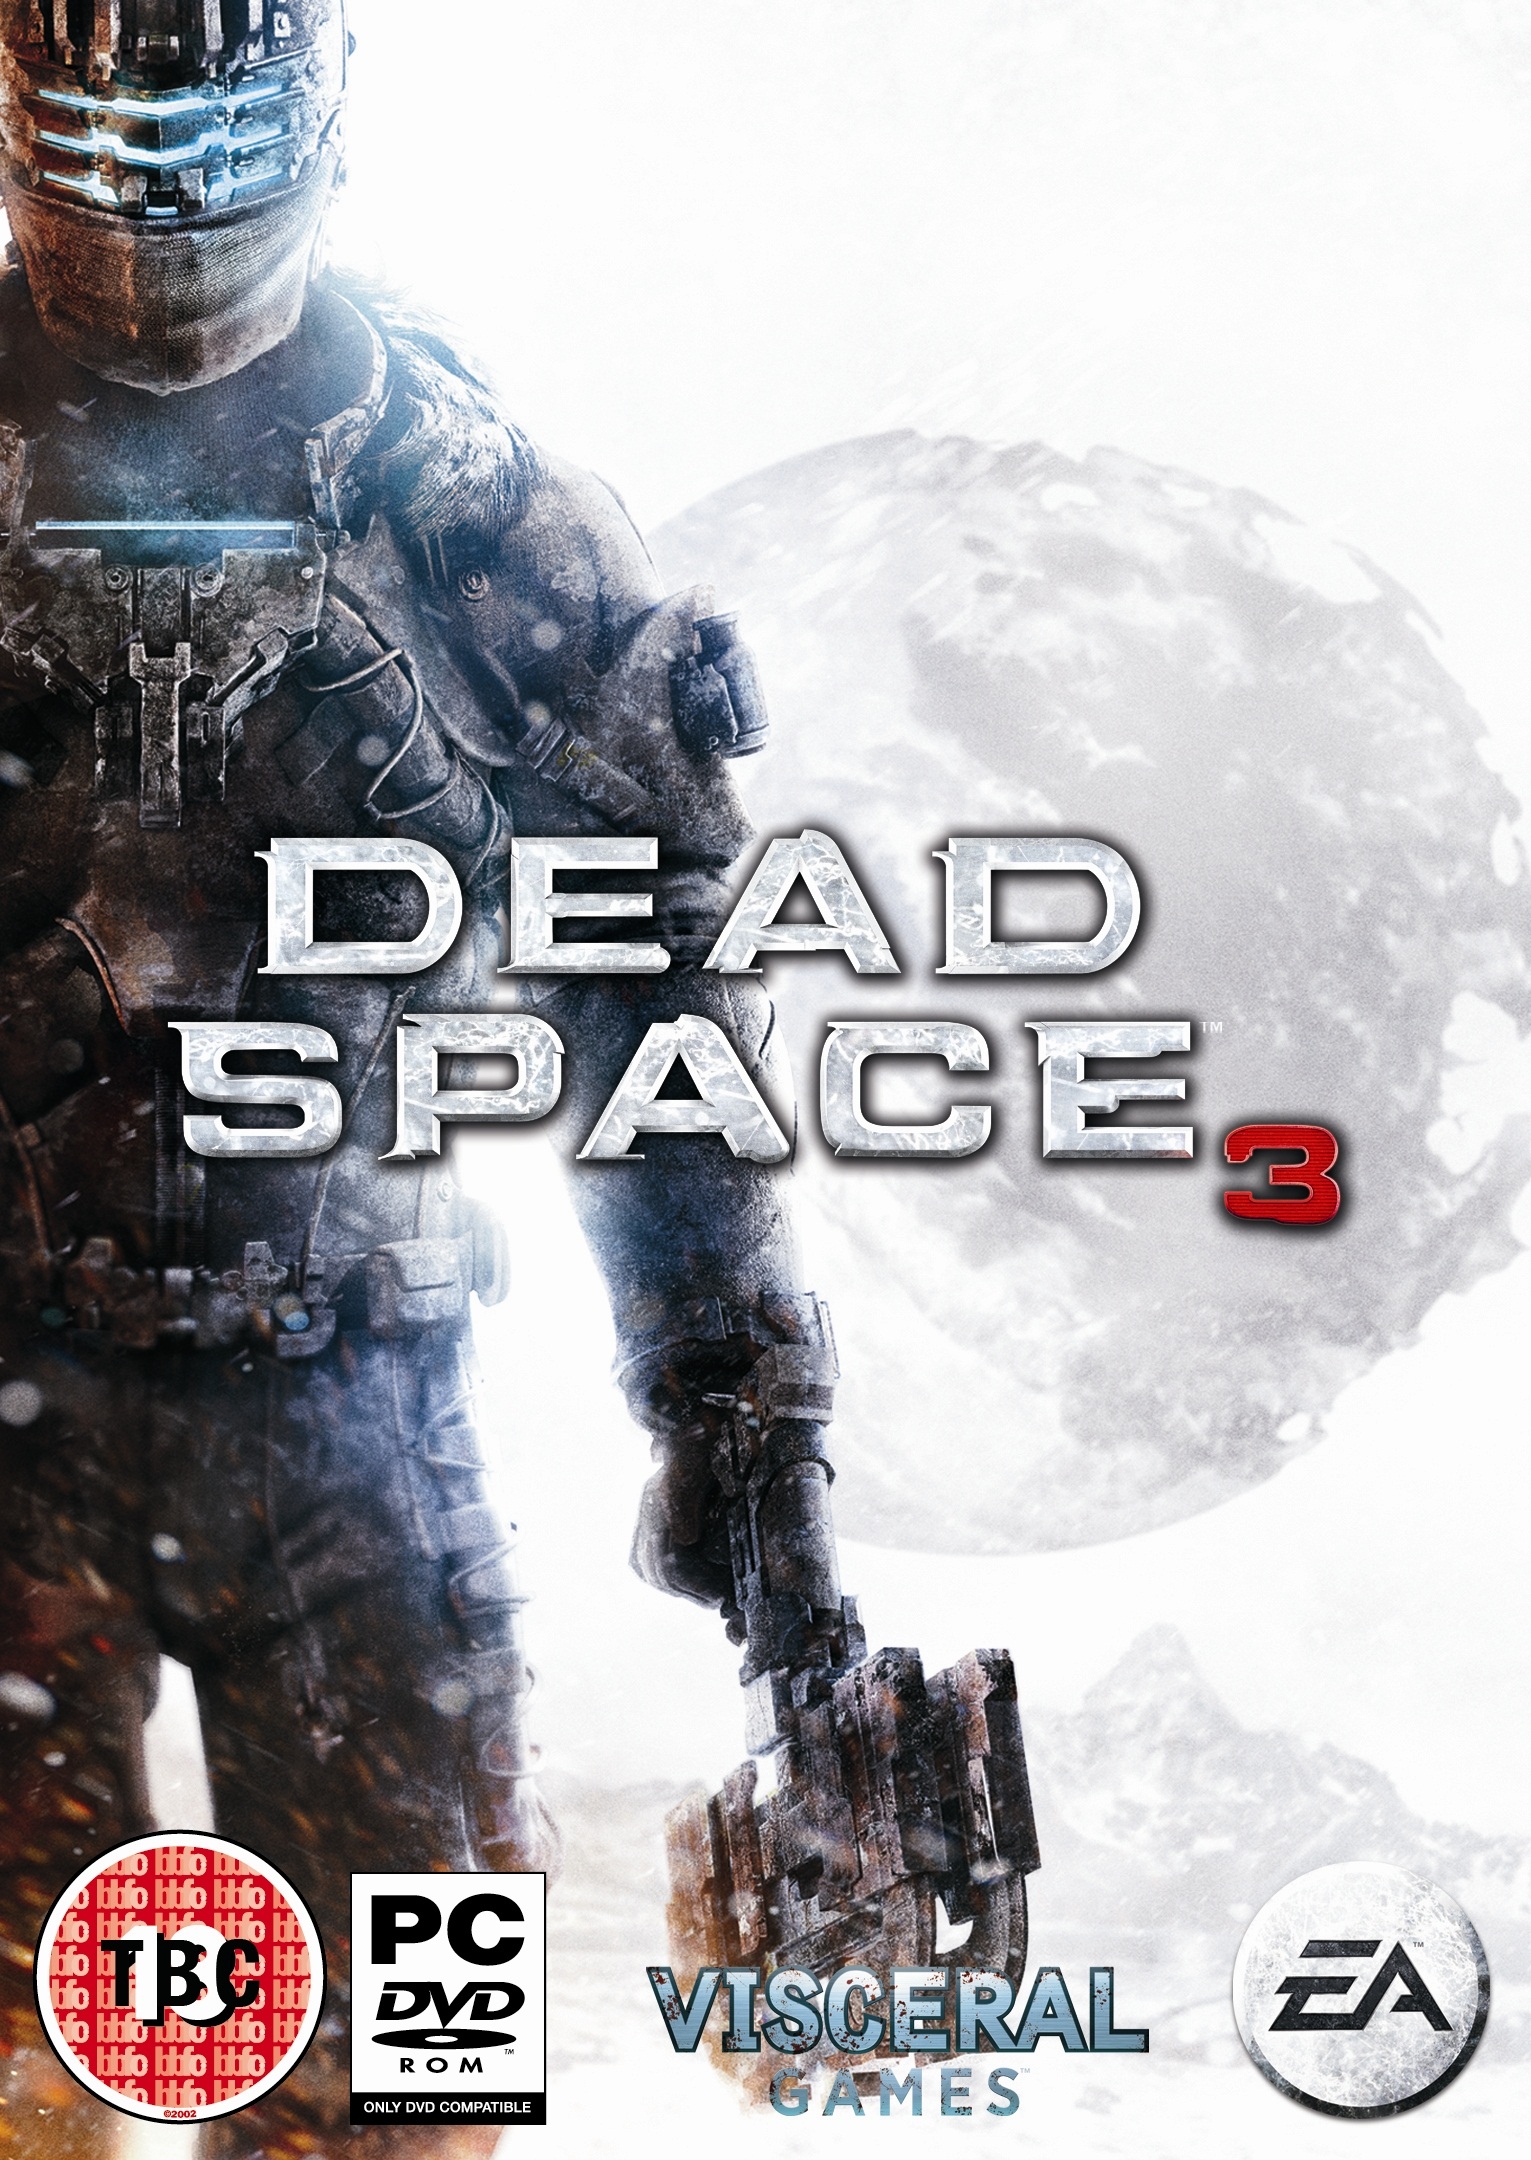 how many chapters are in dead space